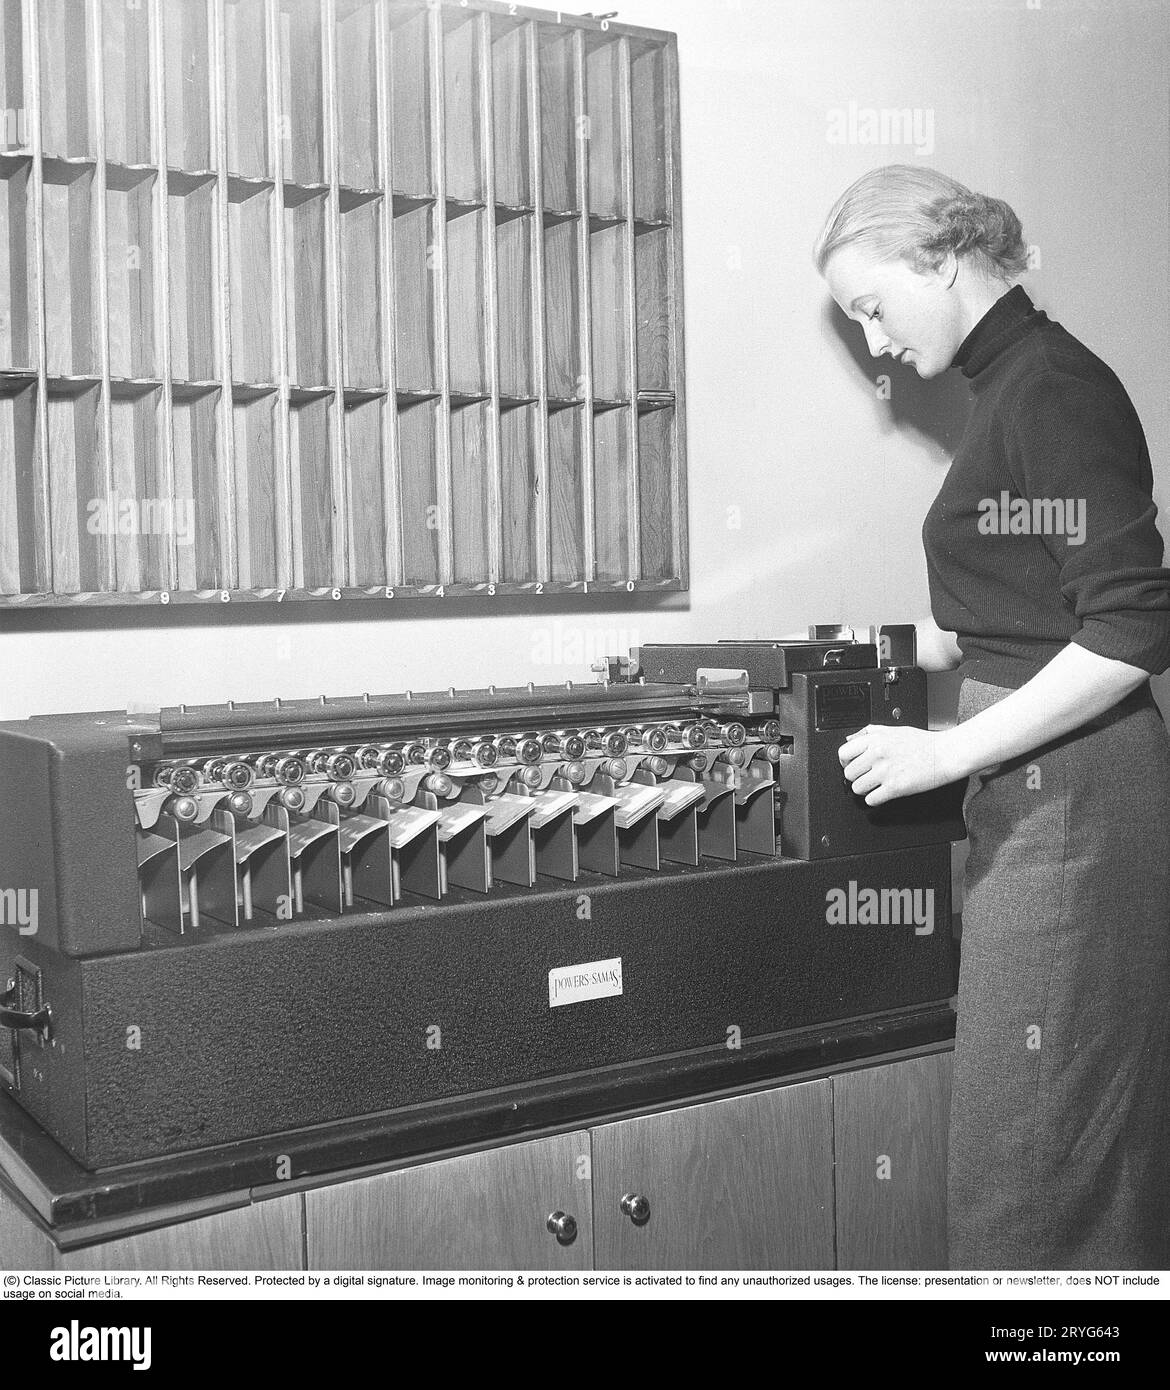 In the 1950s. A female clerk at punch card reader machine overlooking it's function and the feed of  the punch cards into the machine. Punched cards was created by another machine, entering information, creating the punch cards as a storage medium where the punched holes in the paper card were the input information. The picture shows the reader sorting the cards after having read the information in the punch holes. The machine is made by the british manufacturer Powers-Samas who developed the encryption machine, far better and safer then the german Enigma.  Sweden 1954. Kristoffersson ref BM85 Stock Photo